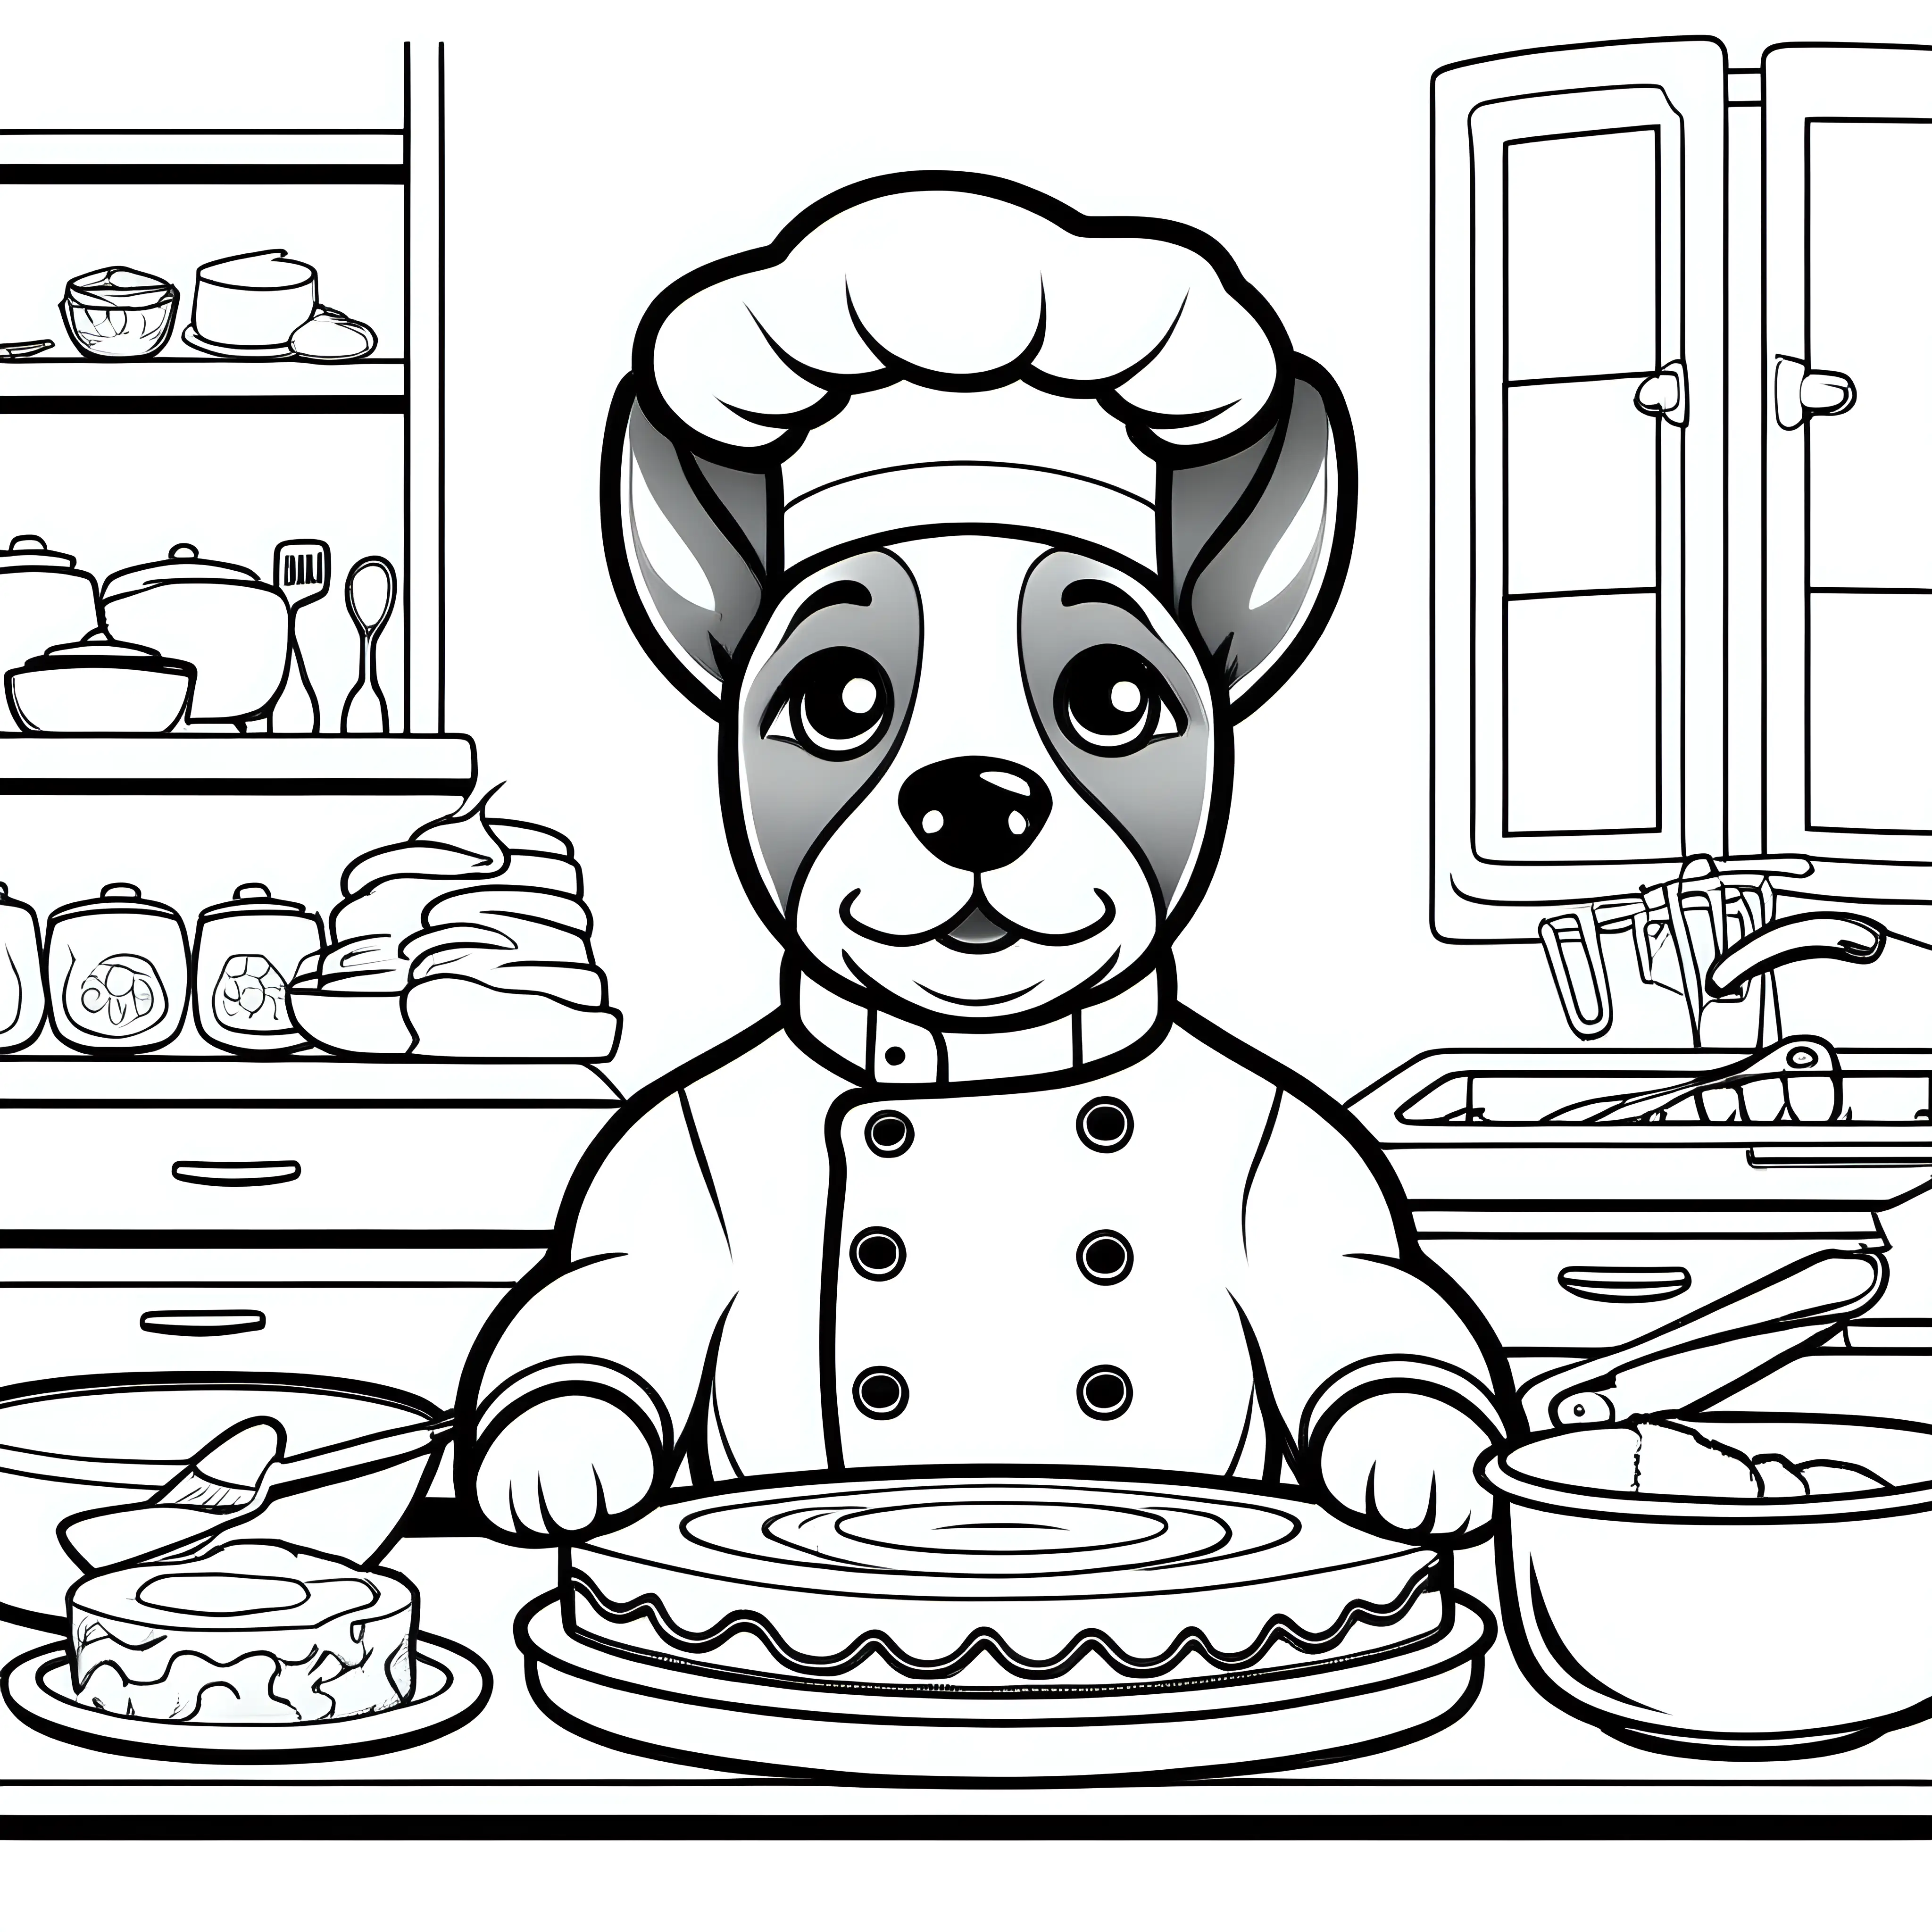 /imagine a cute dog chef, baking a cake - for coloring book with black and white color, crisp lines and white background –ar 17:22